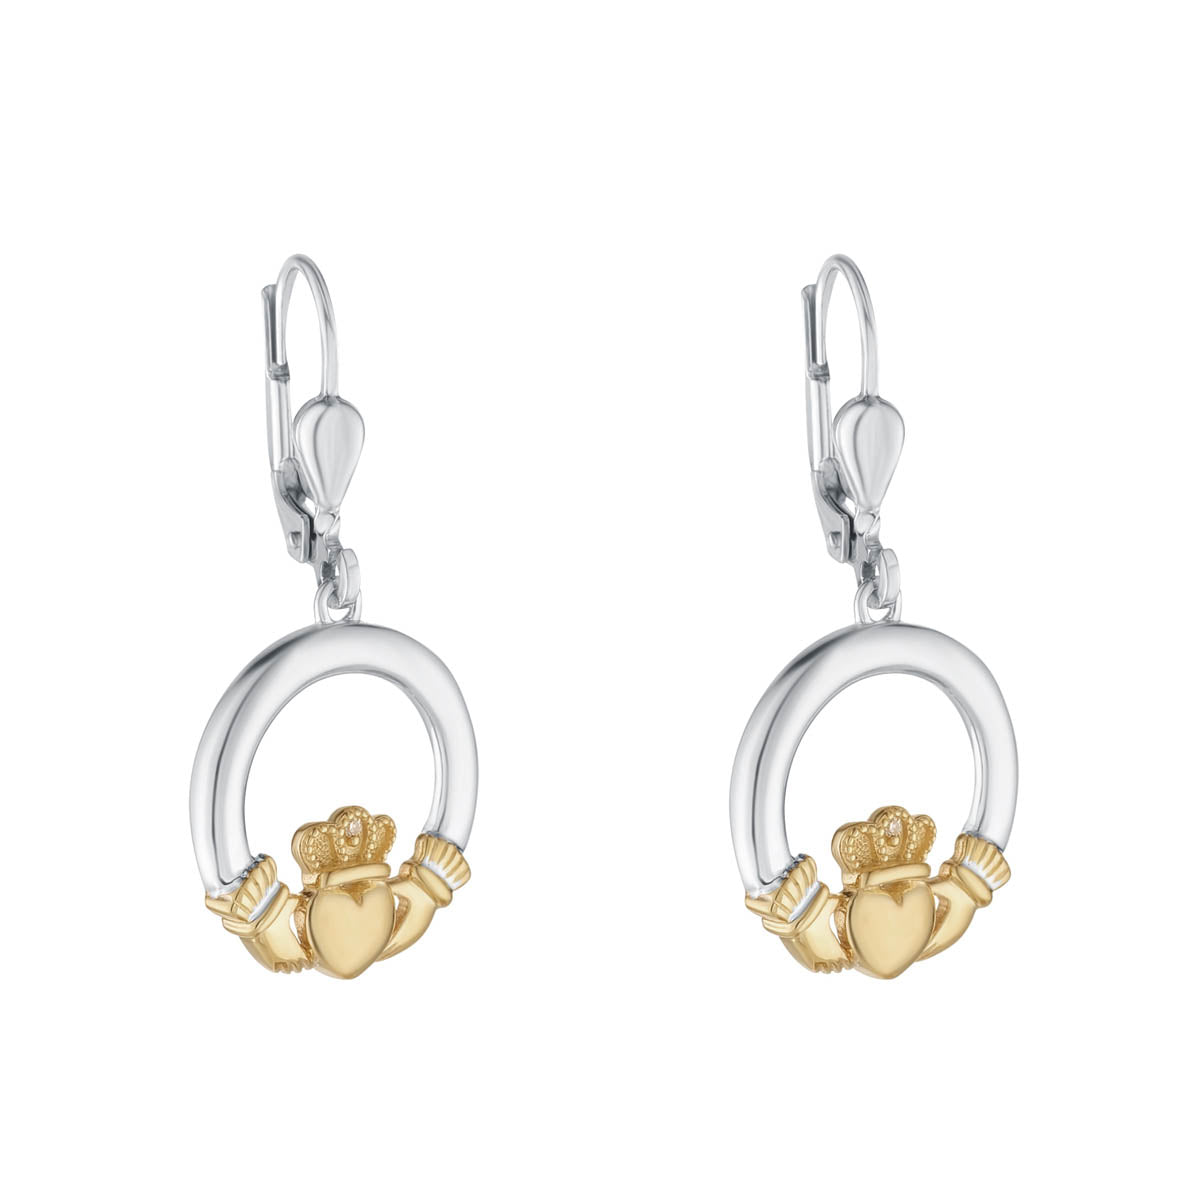 Stock image of Solvar Gold And Silver Diamond Claddagh Earrings S34162